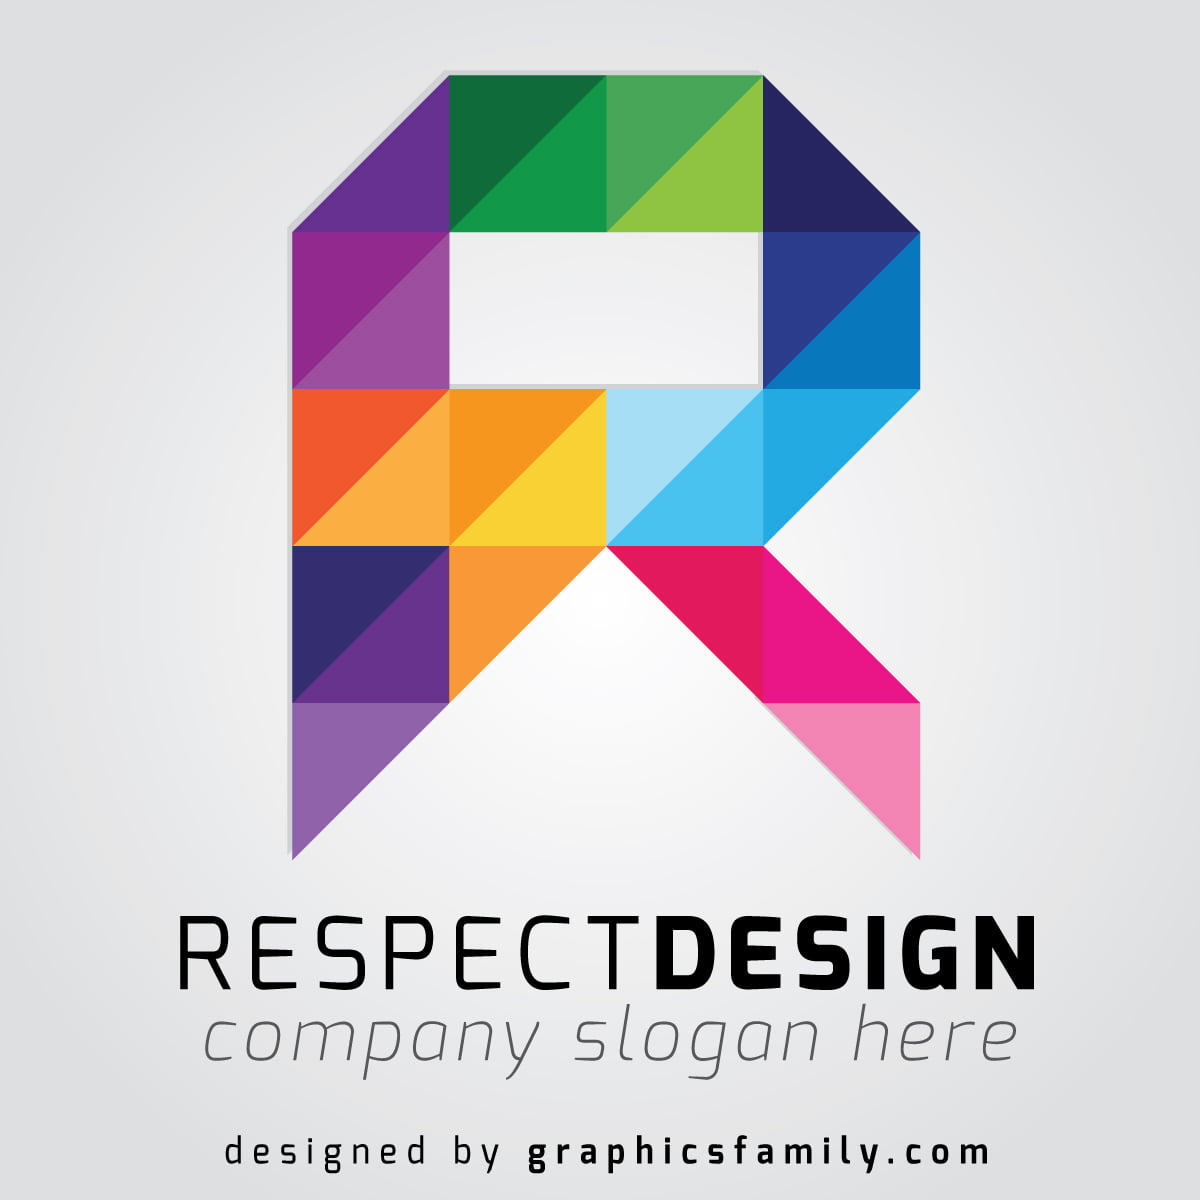 Business Logo Design Company In Ahmedabad | Custom Logo Designs For Your  Business